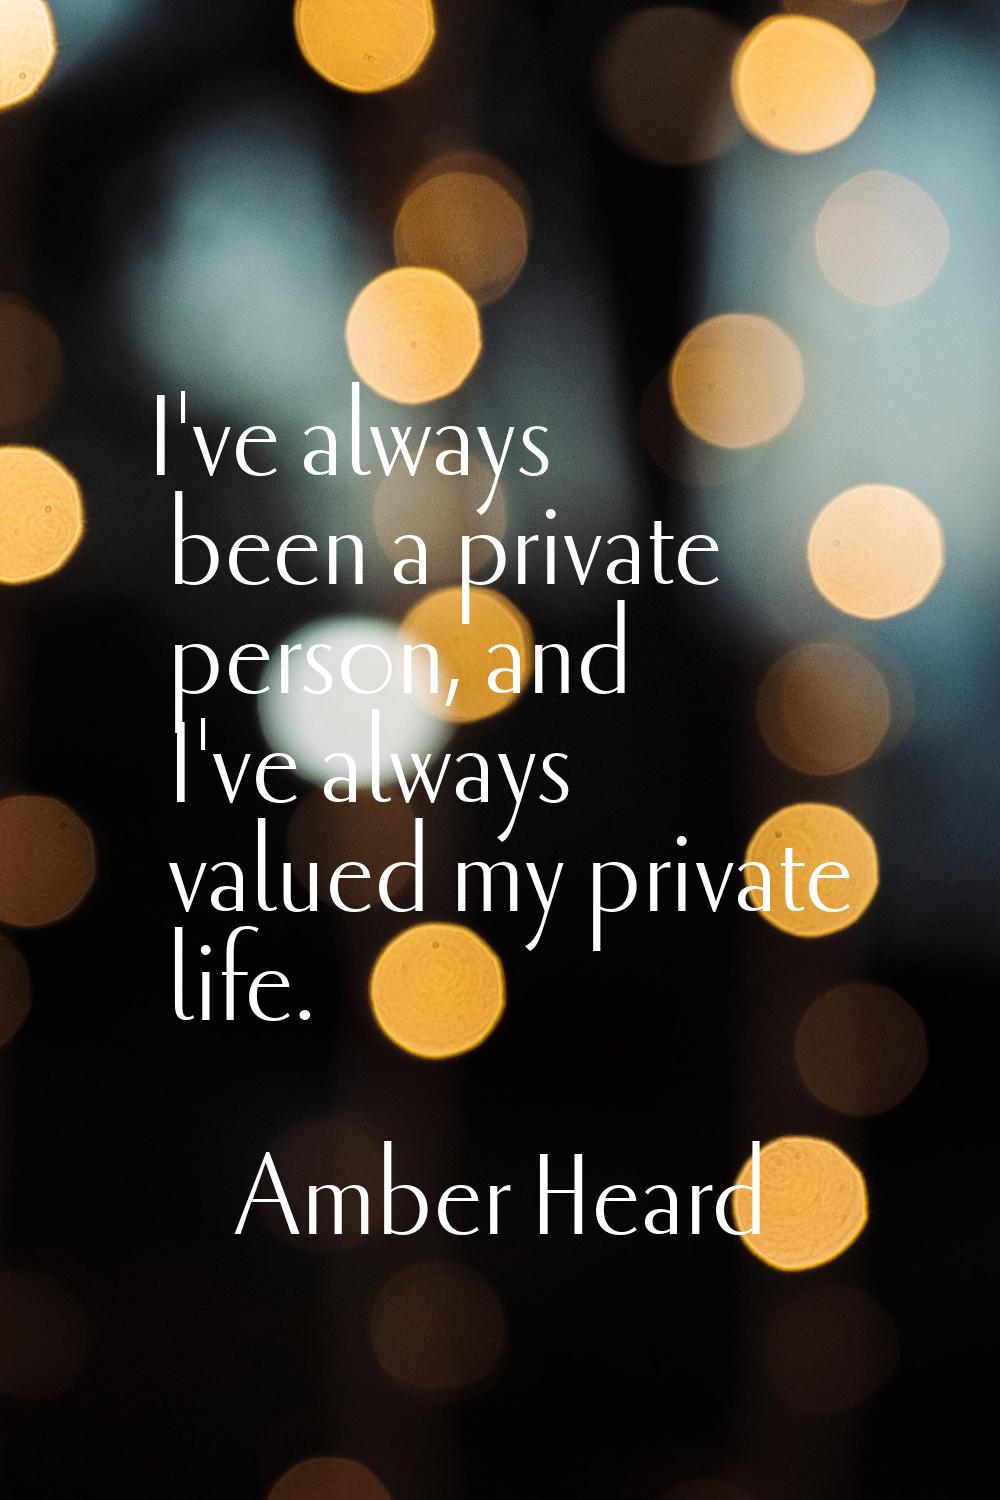 I've always been a private person, and I've always valued my private life.